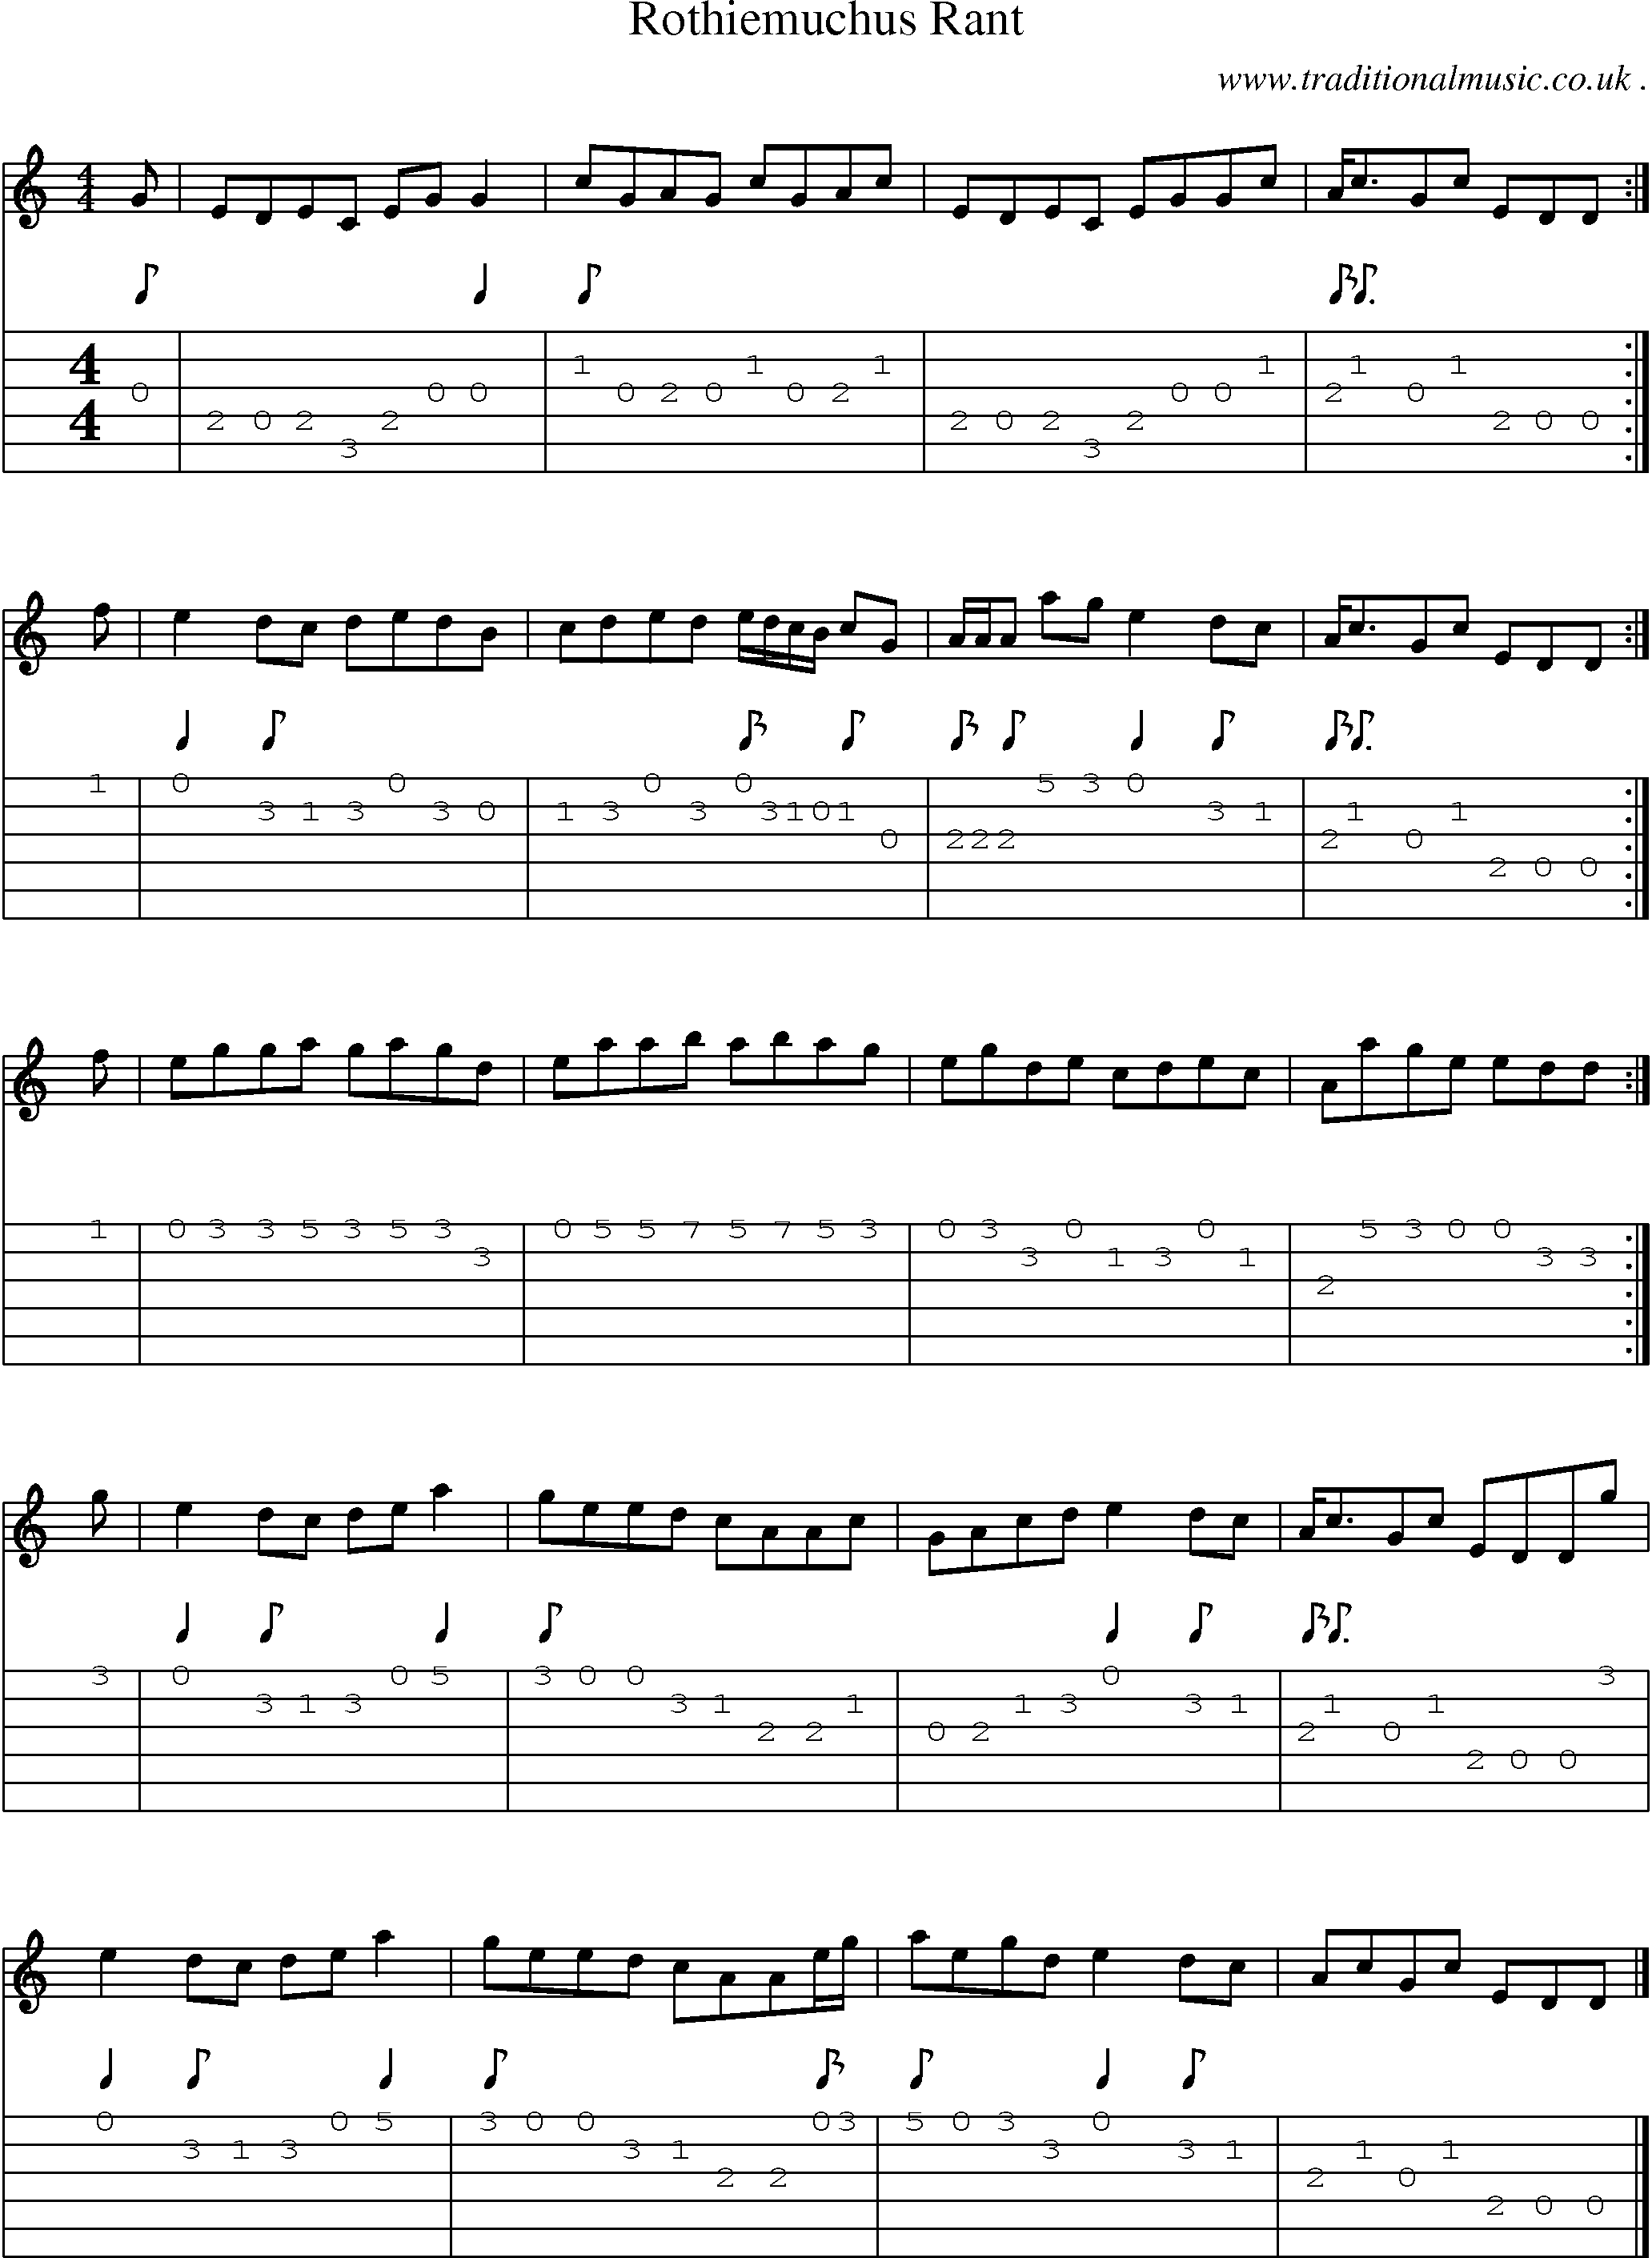 Sheet-music  score, Chords and Guitar Tabs for Rothiemuchus Rant